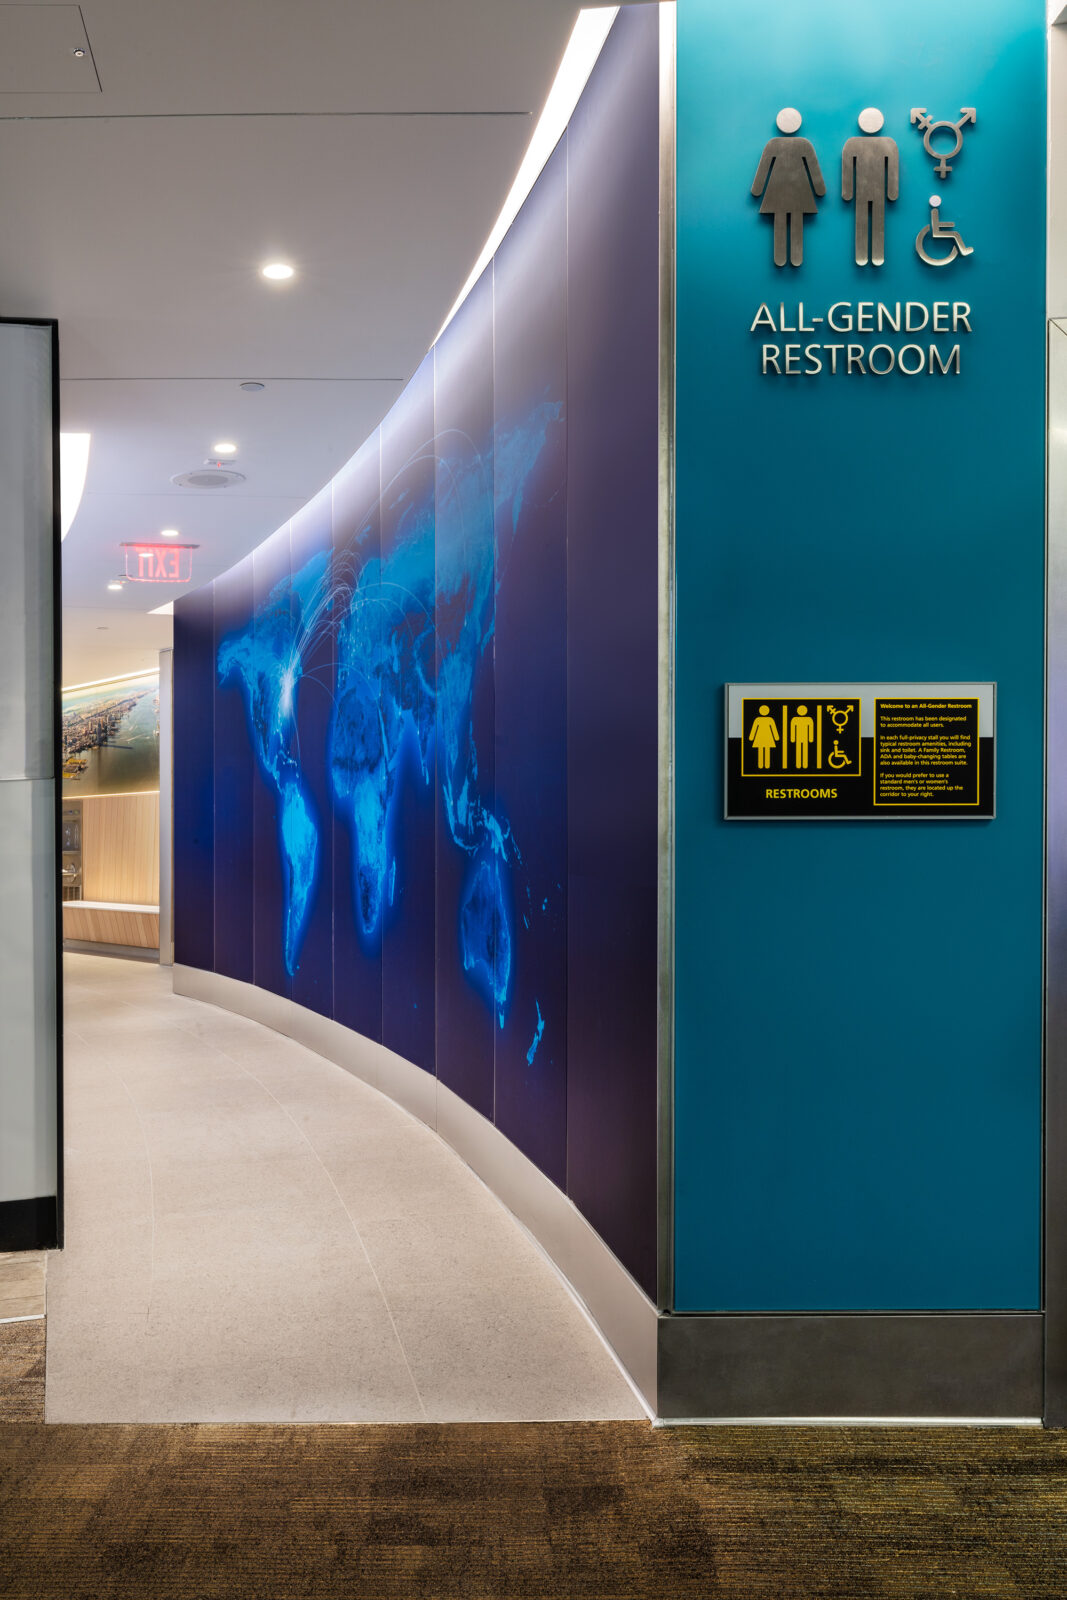 2 airports are finalists for America’s Finest Restroom